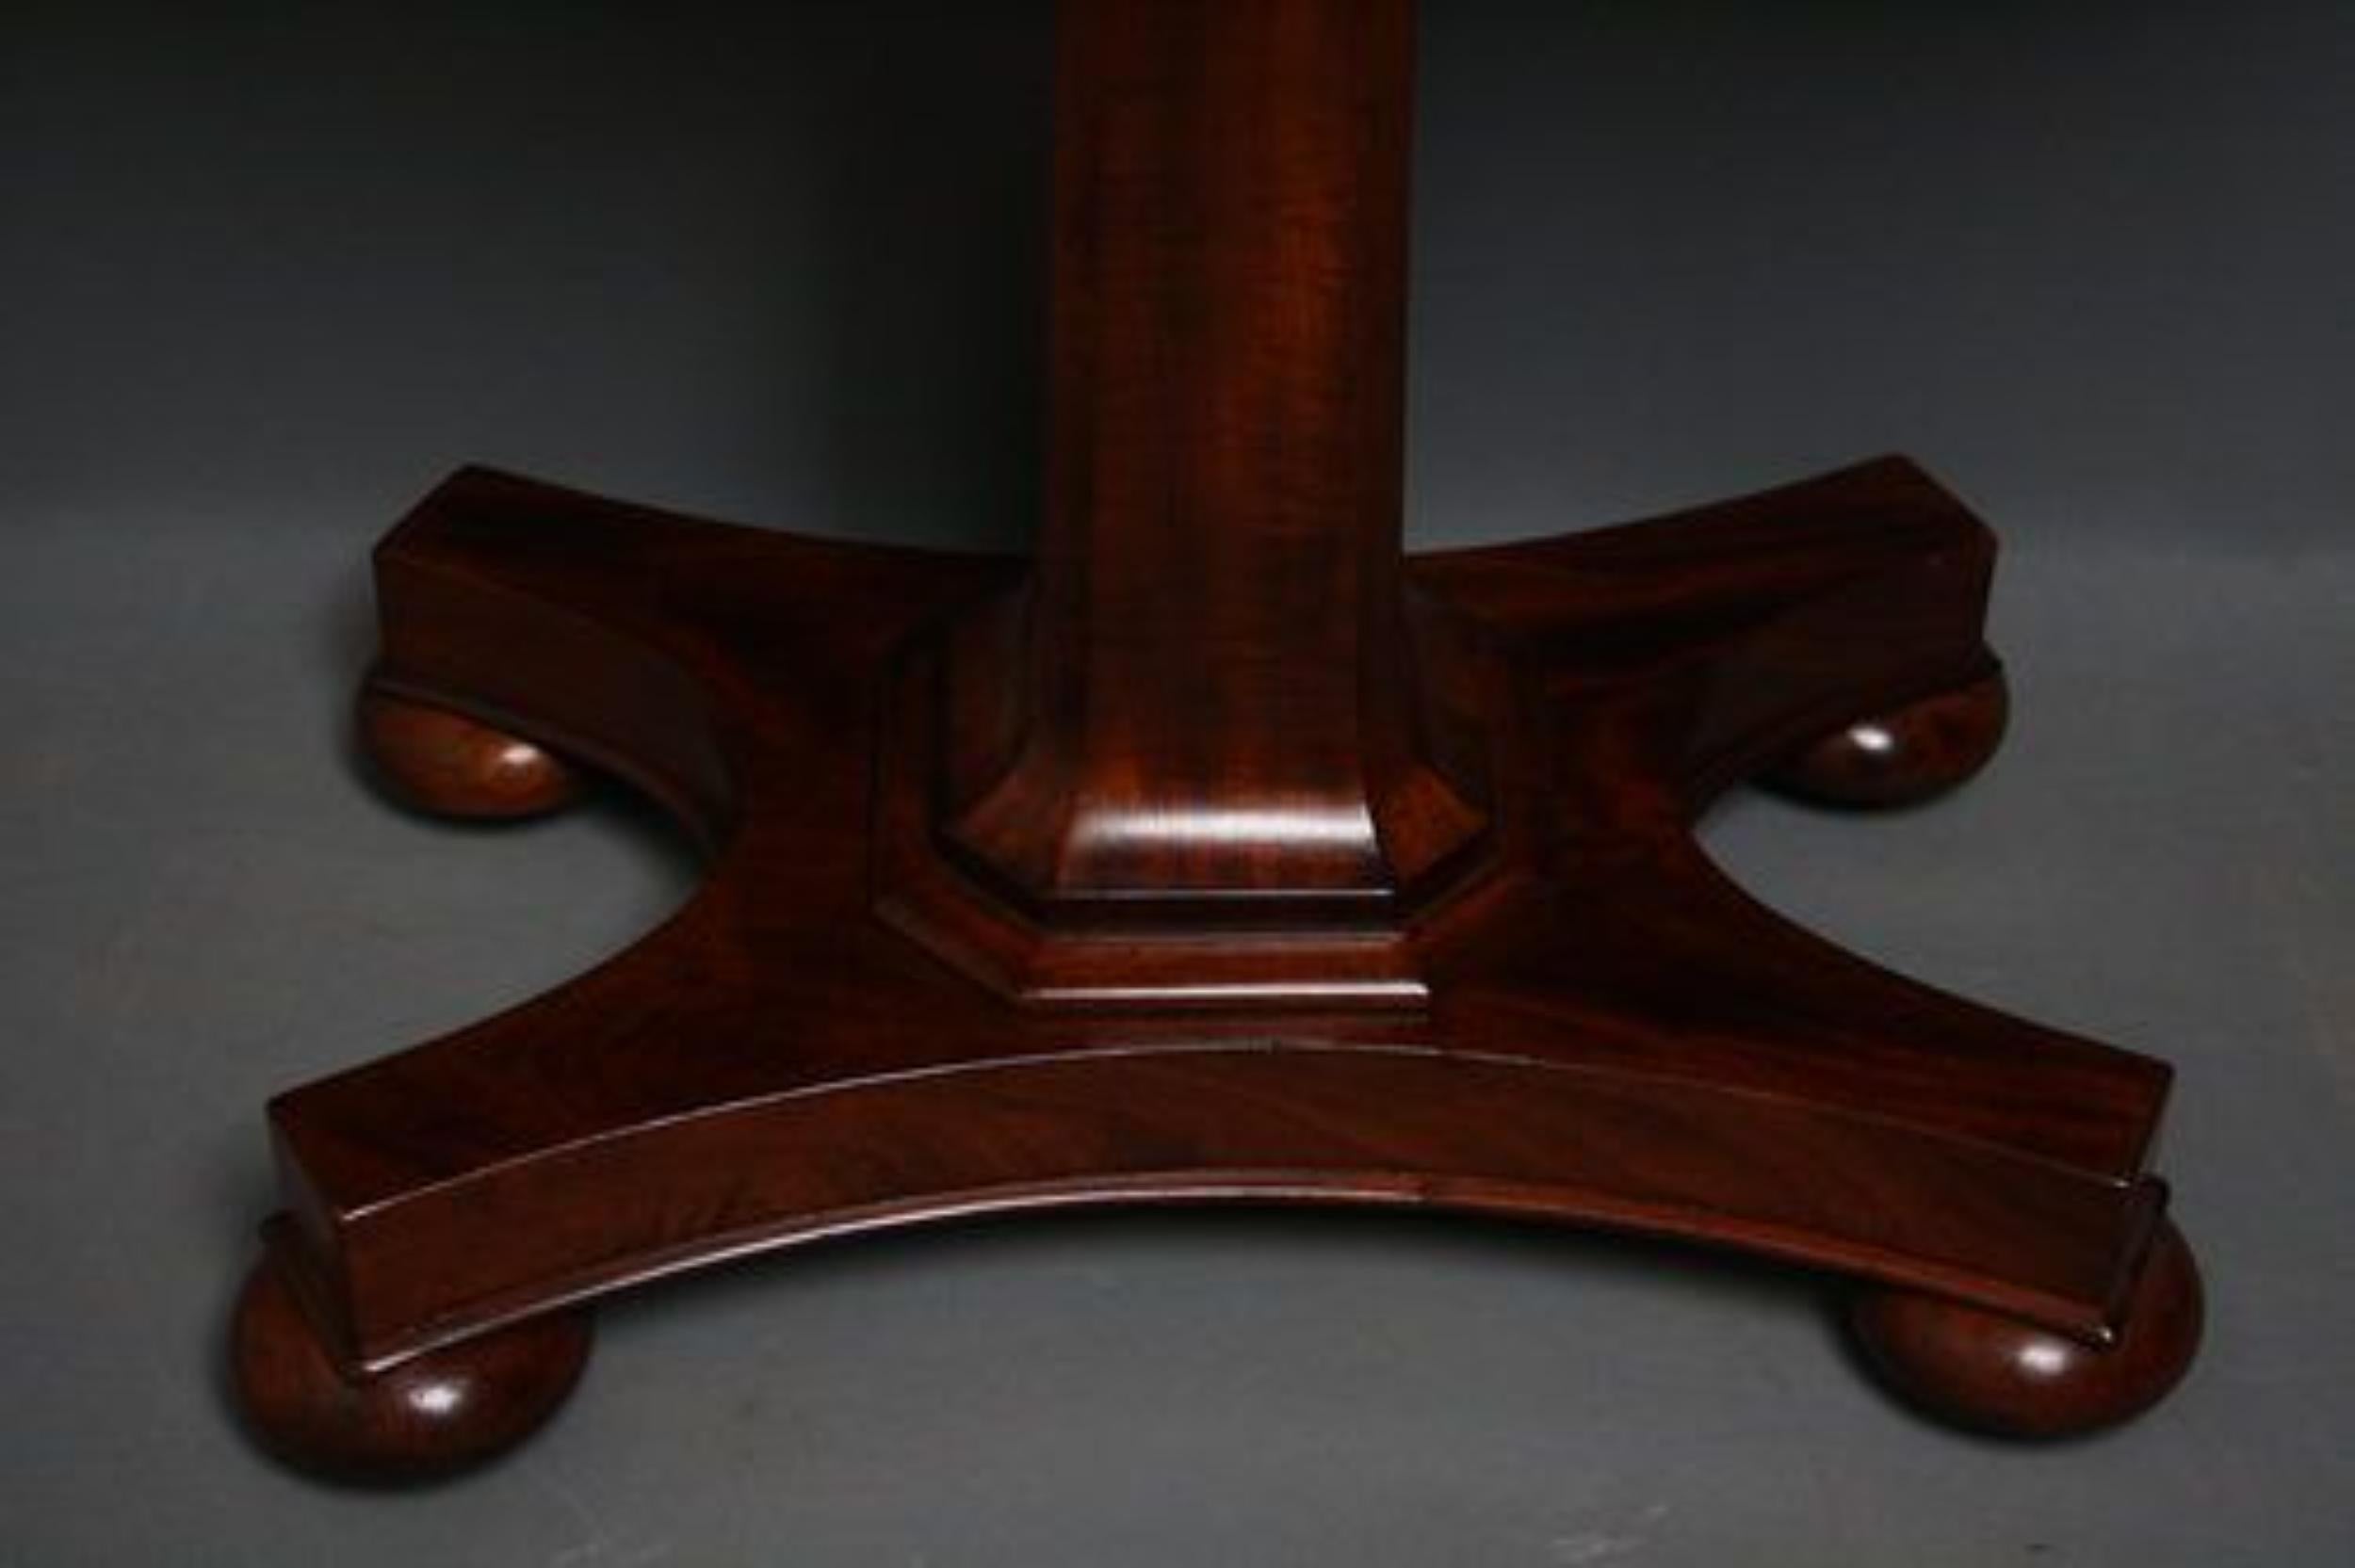 Sn586 Elegant, William IV period, mahogany fold over card table, having figure mahogany top opening to reveal baise interior with shaped frieze having decorative carvings, stands on slim tapering flat facetted column with quatrofoil platform base